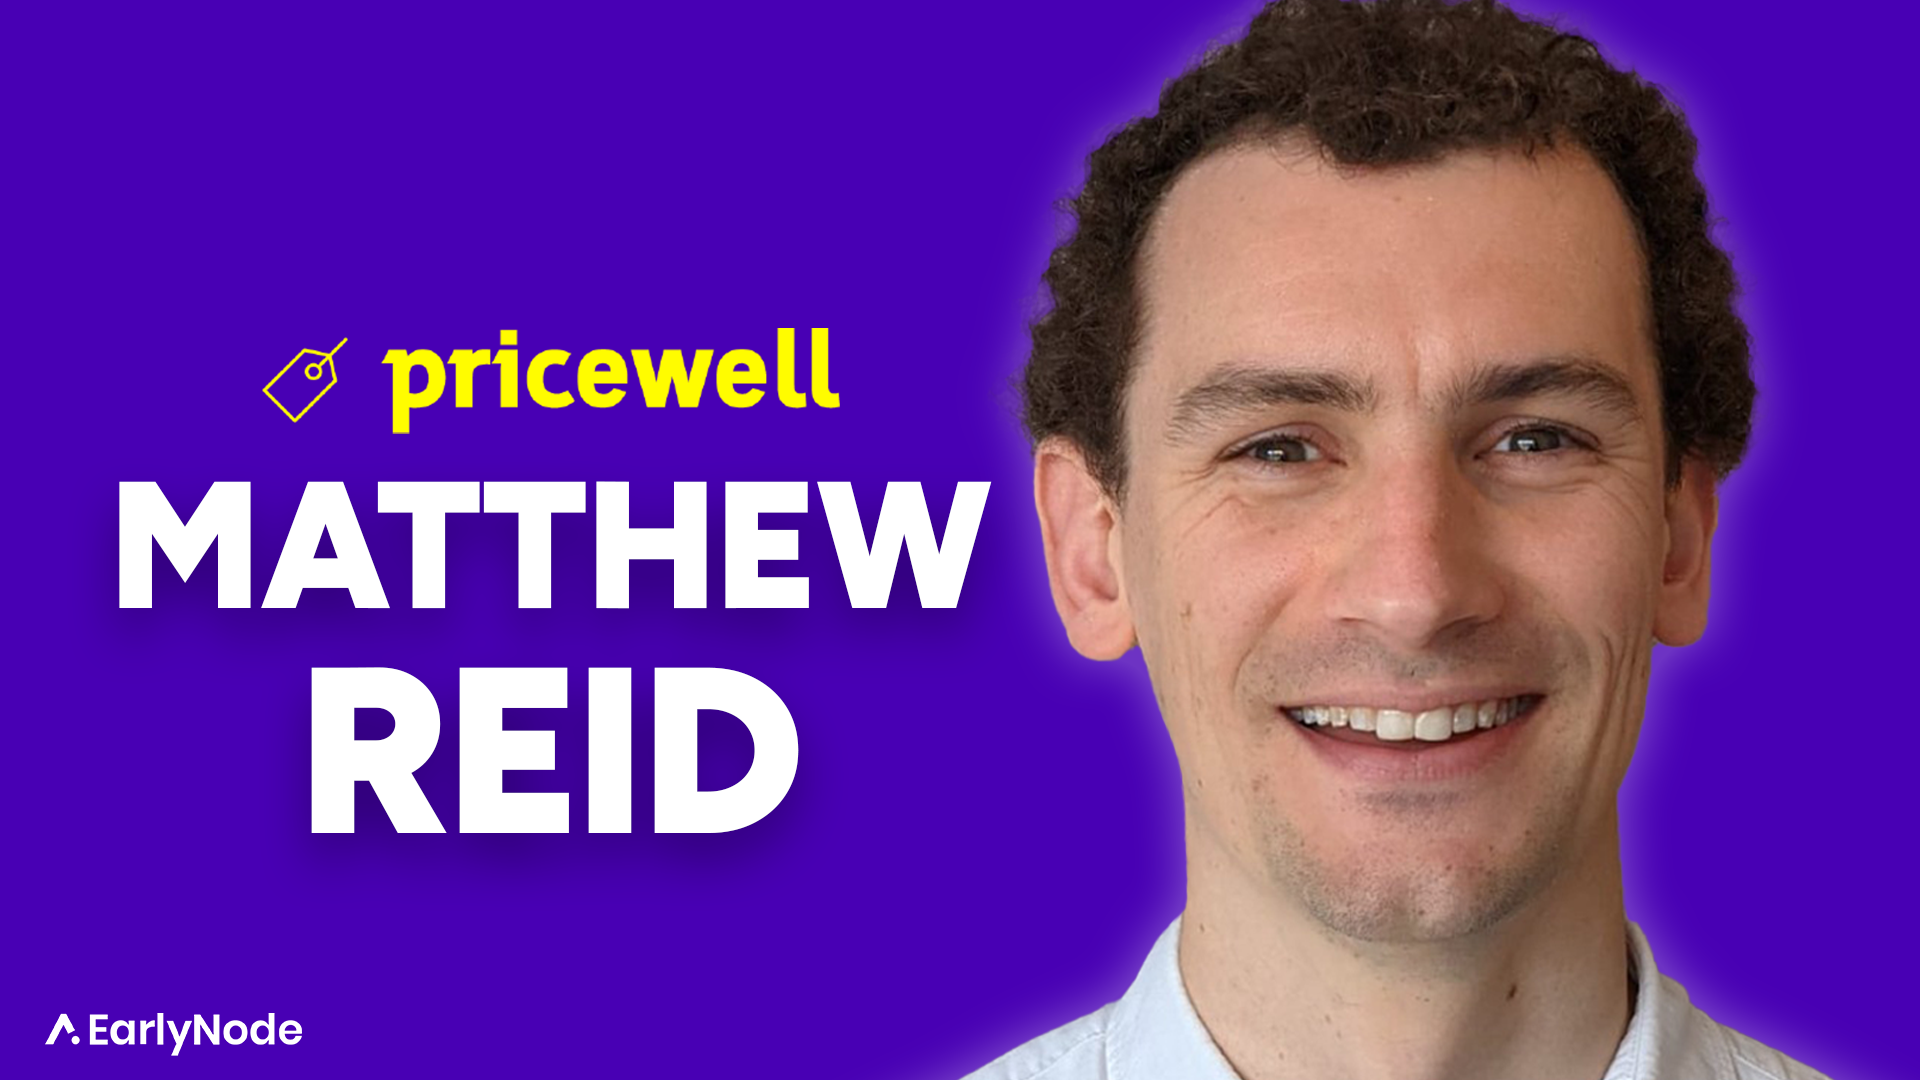 Building niche SaaS while working a day job | Interview with Matthew Reid, Co-founder of PriceWell